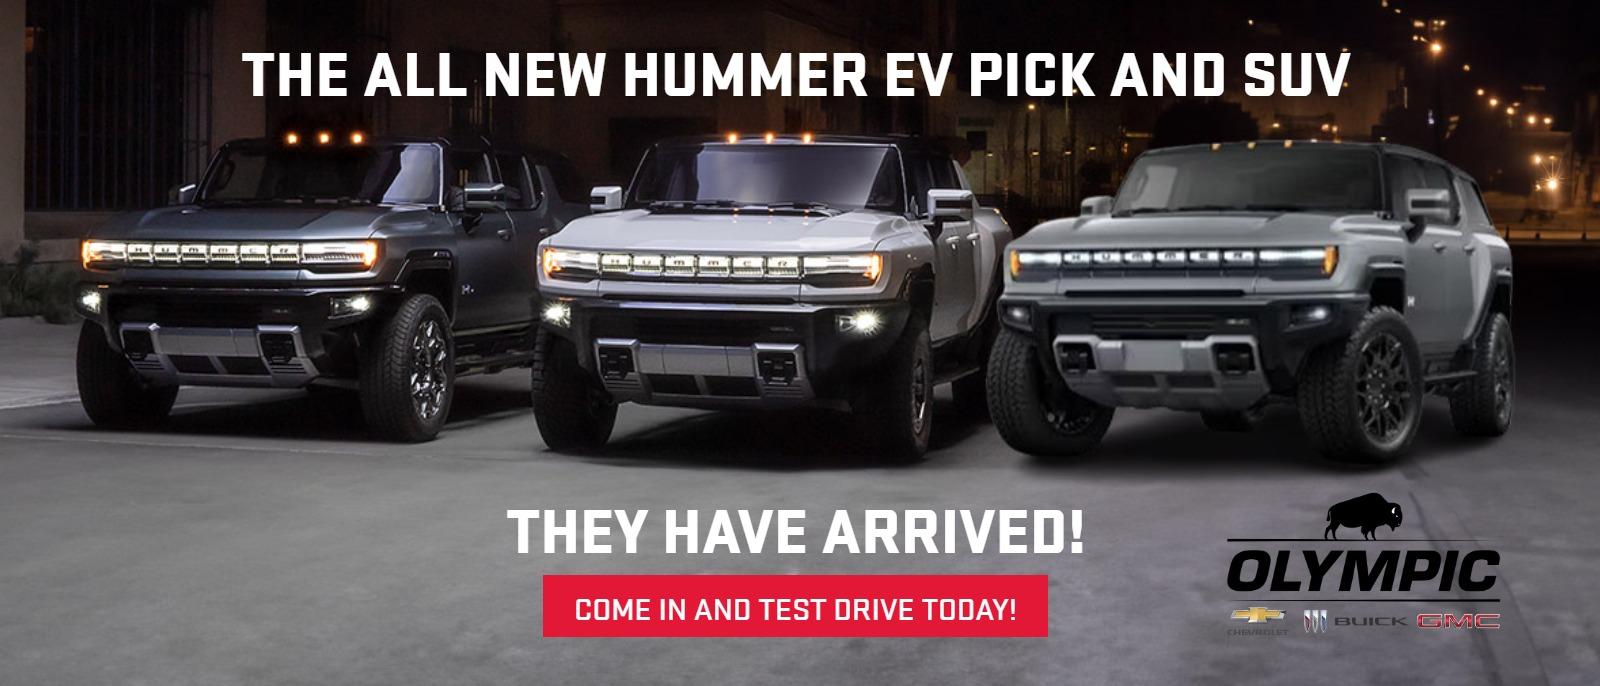 The ALL NEW Hummer Ev Pick and SUV
They Have Arrived!
Come in and test drive today!